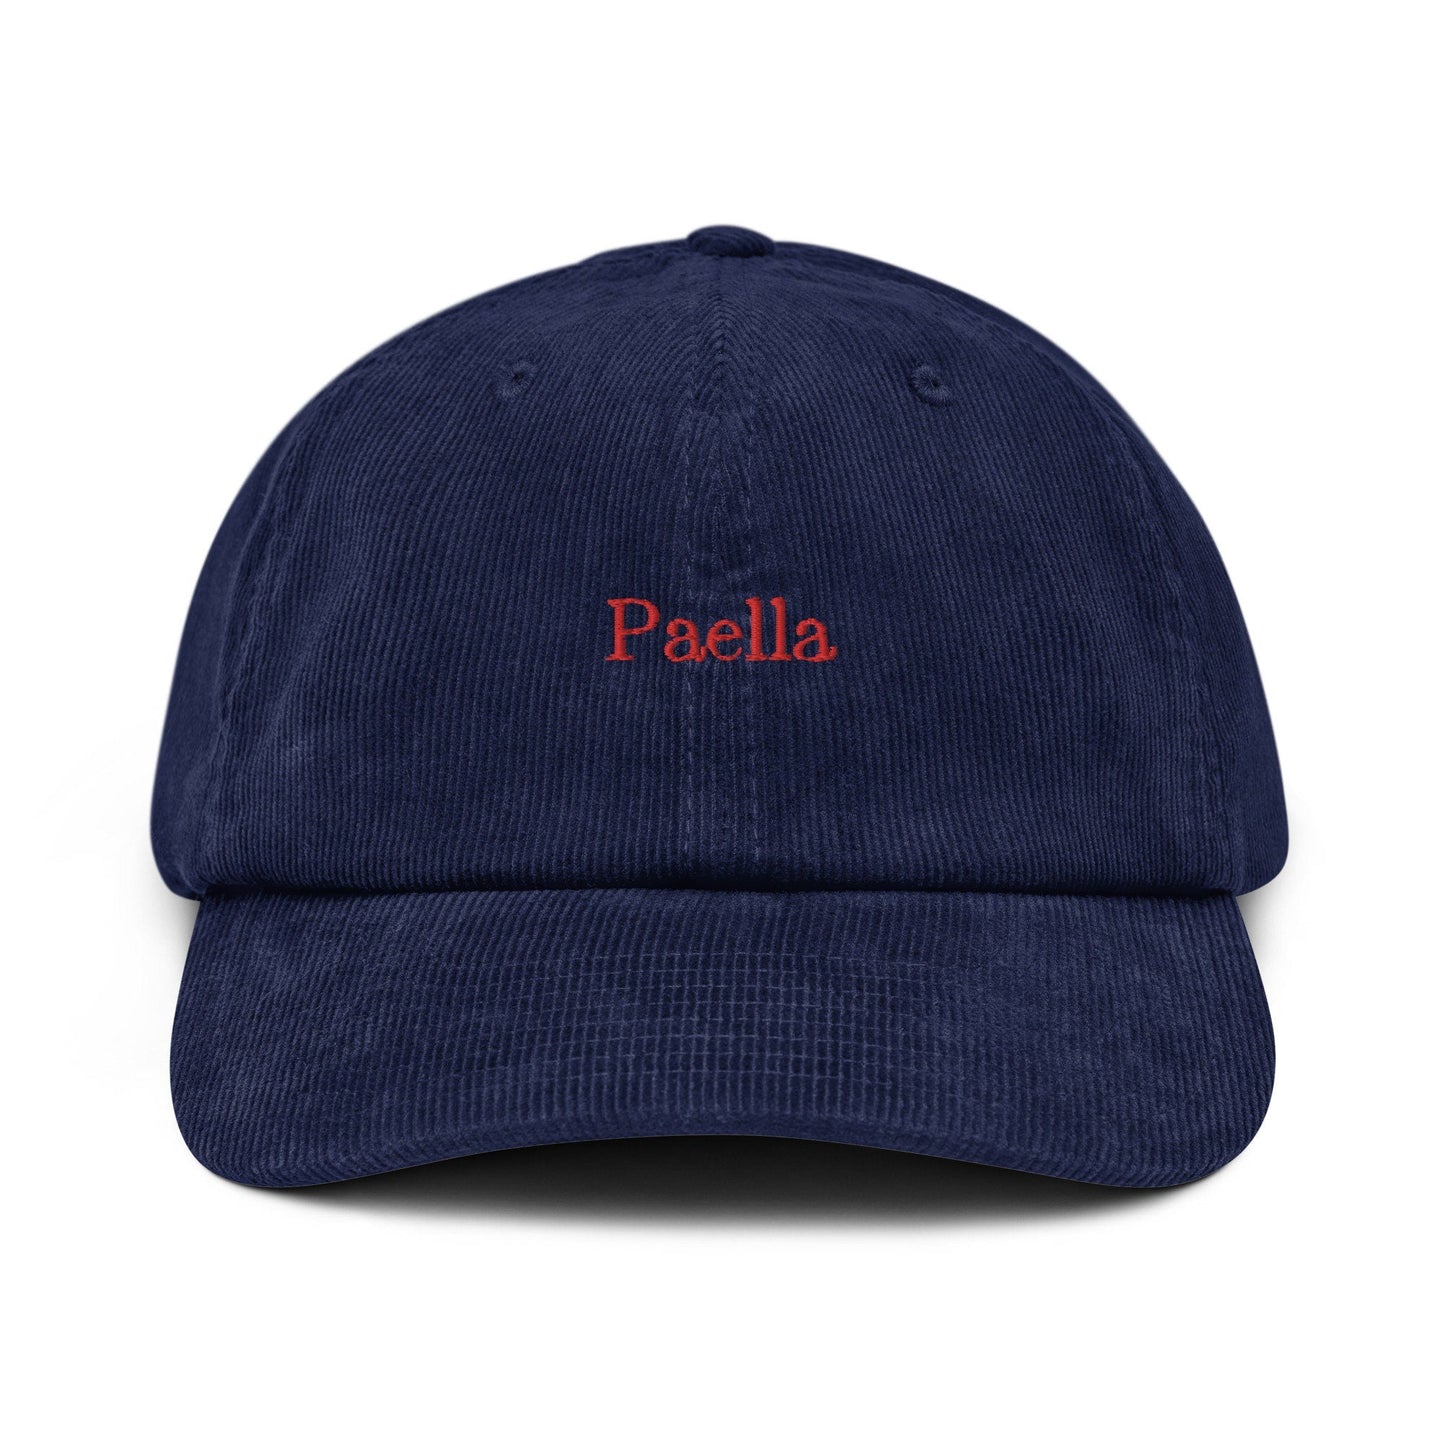 Paella Corduroy Hat - Gift for Spanish Tapas Lovers - Handmade Embroidered Cap - Evilwater Originals